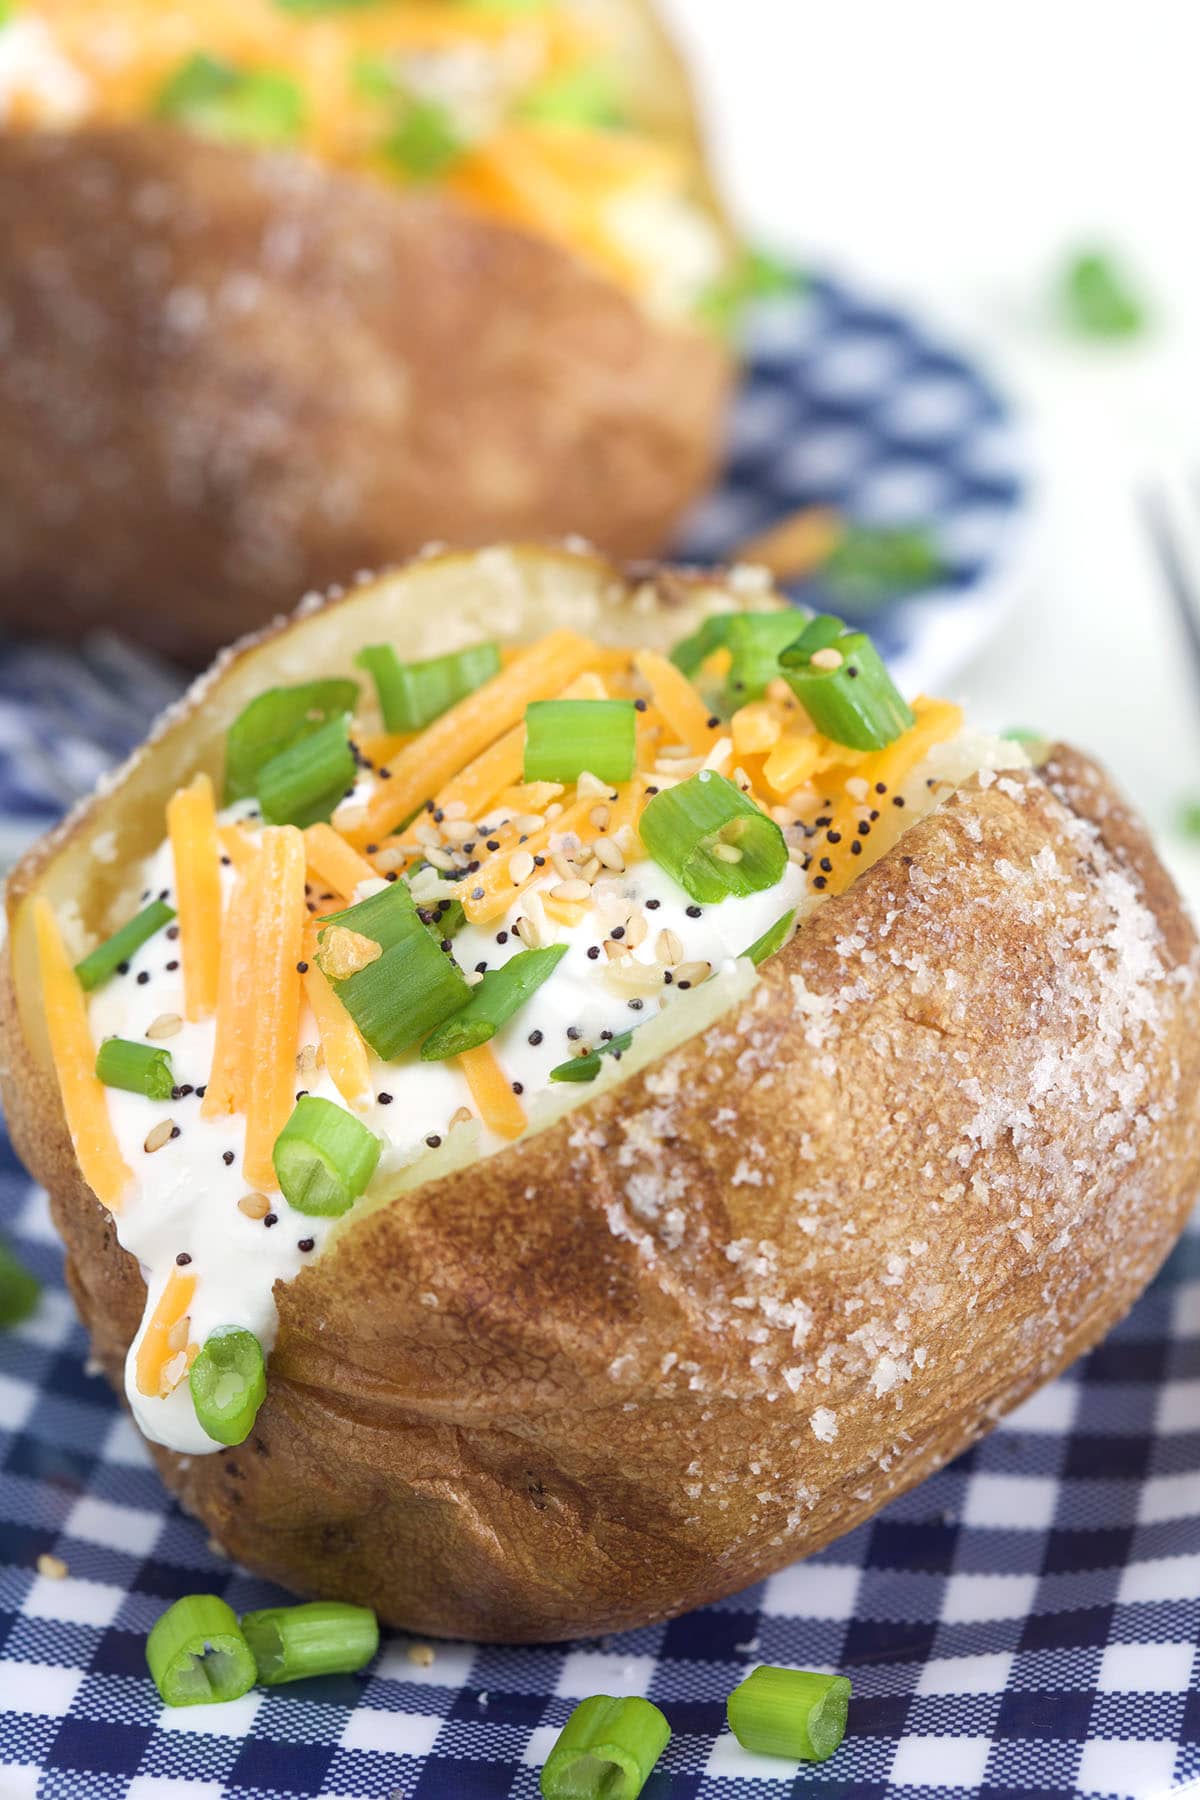 A baked potato is filled with sour Crean, chives, black pepper and cheese. 